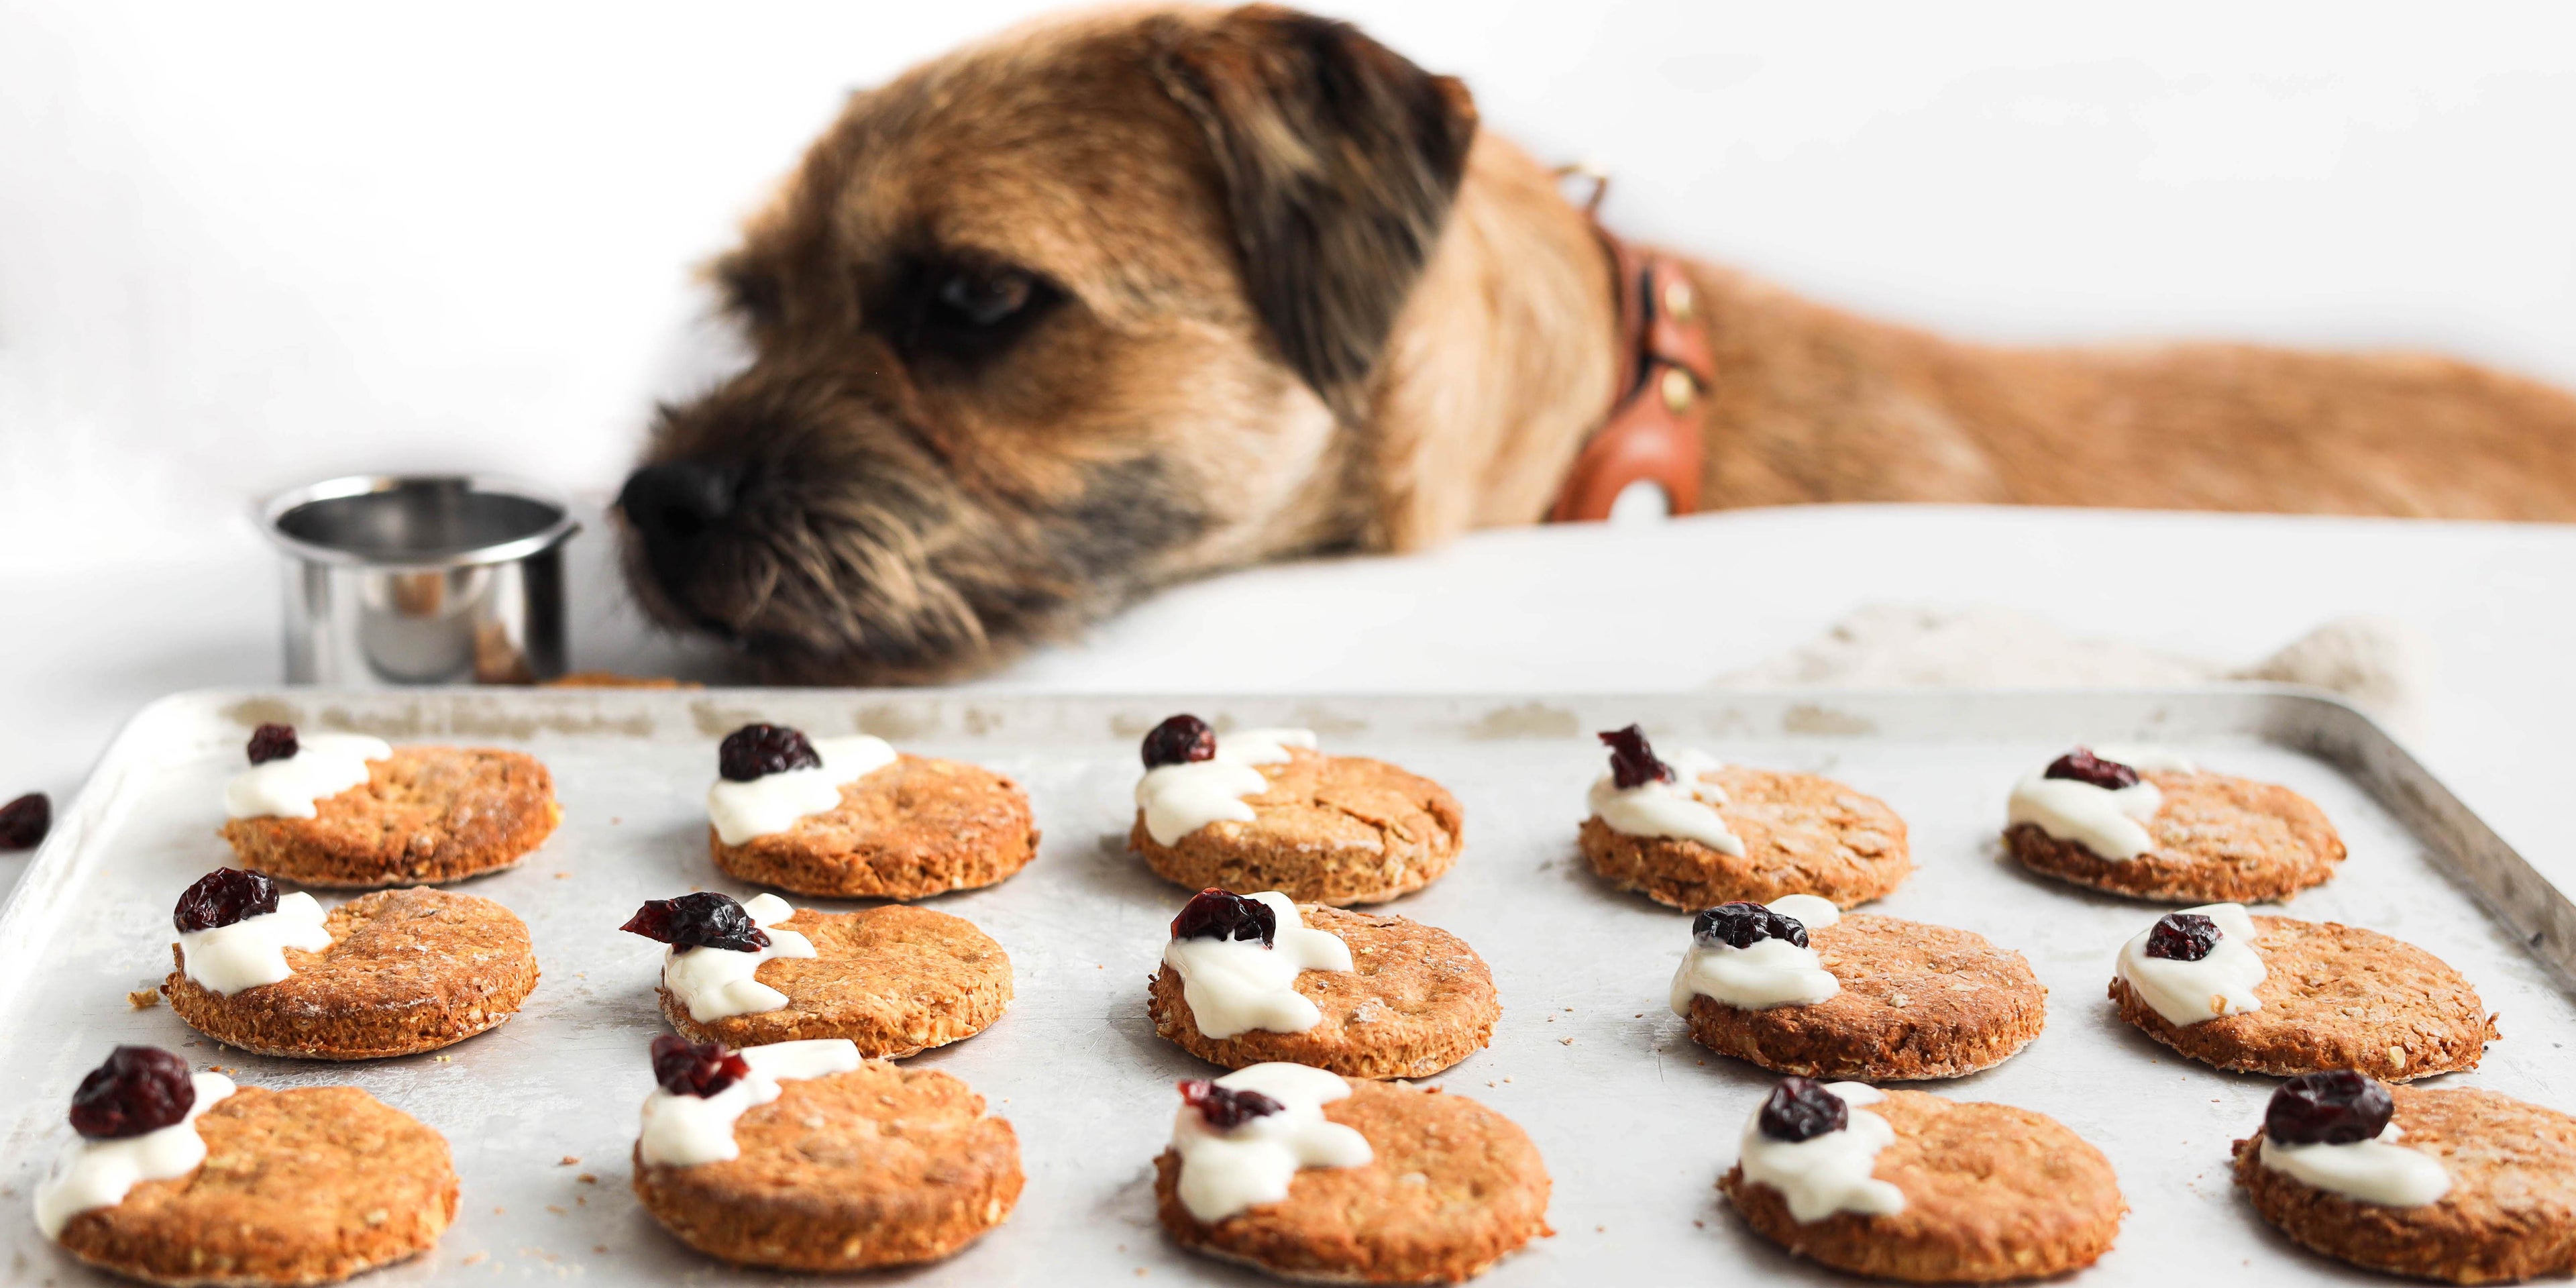 Healthy and Tasty Puppy Treats: A Guide to Keeping Your Pup Happy and Nourished